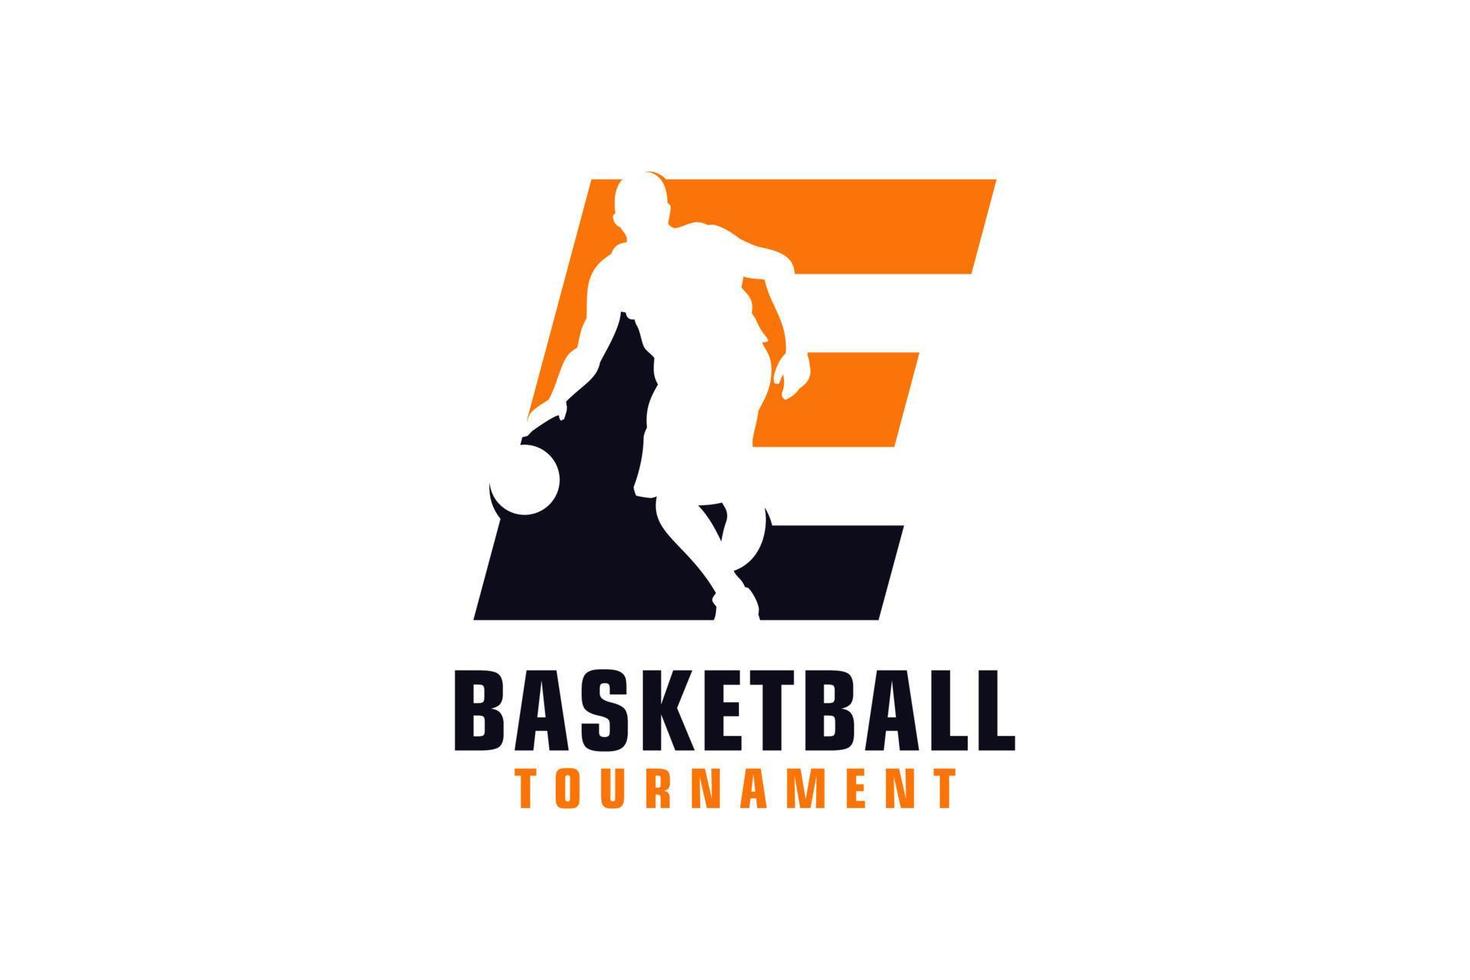 Letter E with Basketball Logo Design. Vector Design Template Elements for Sport Team or Corporate Identity.